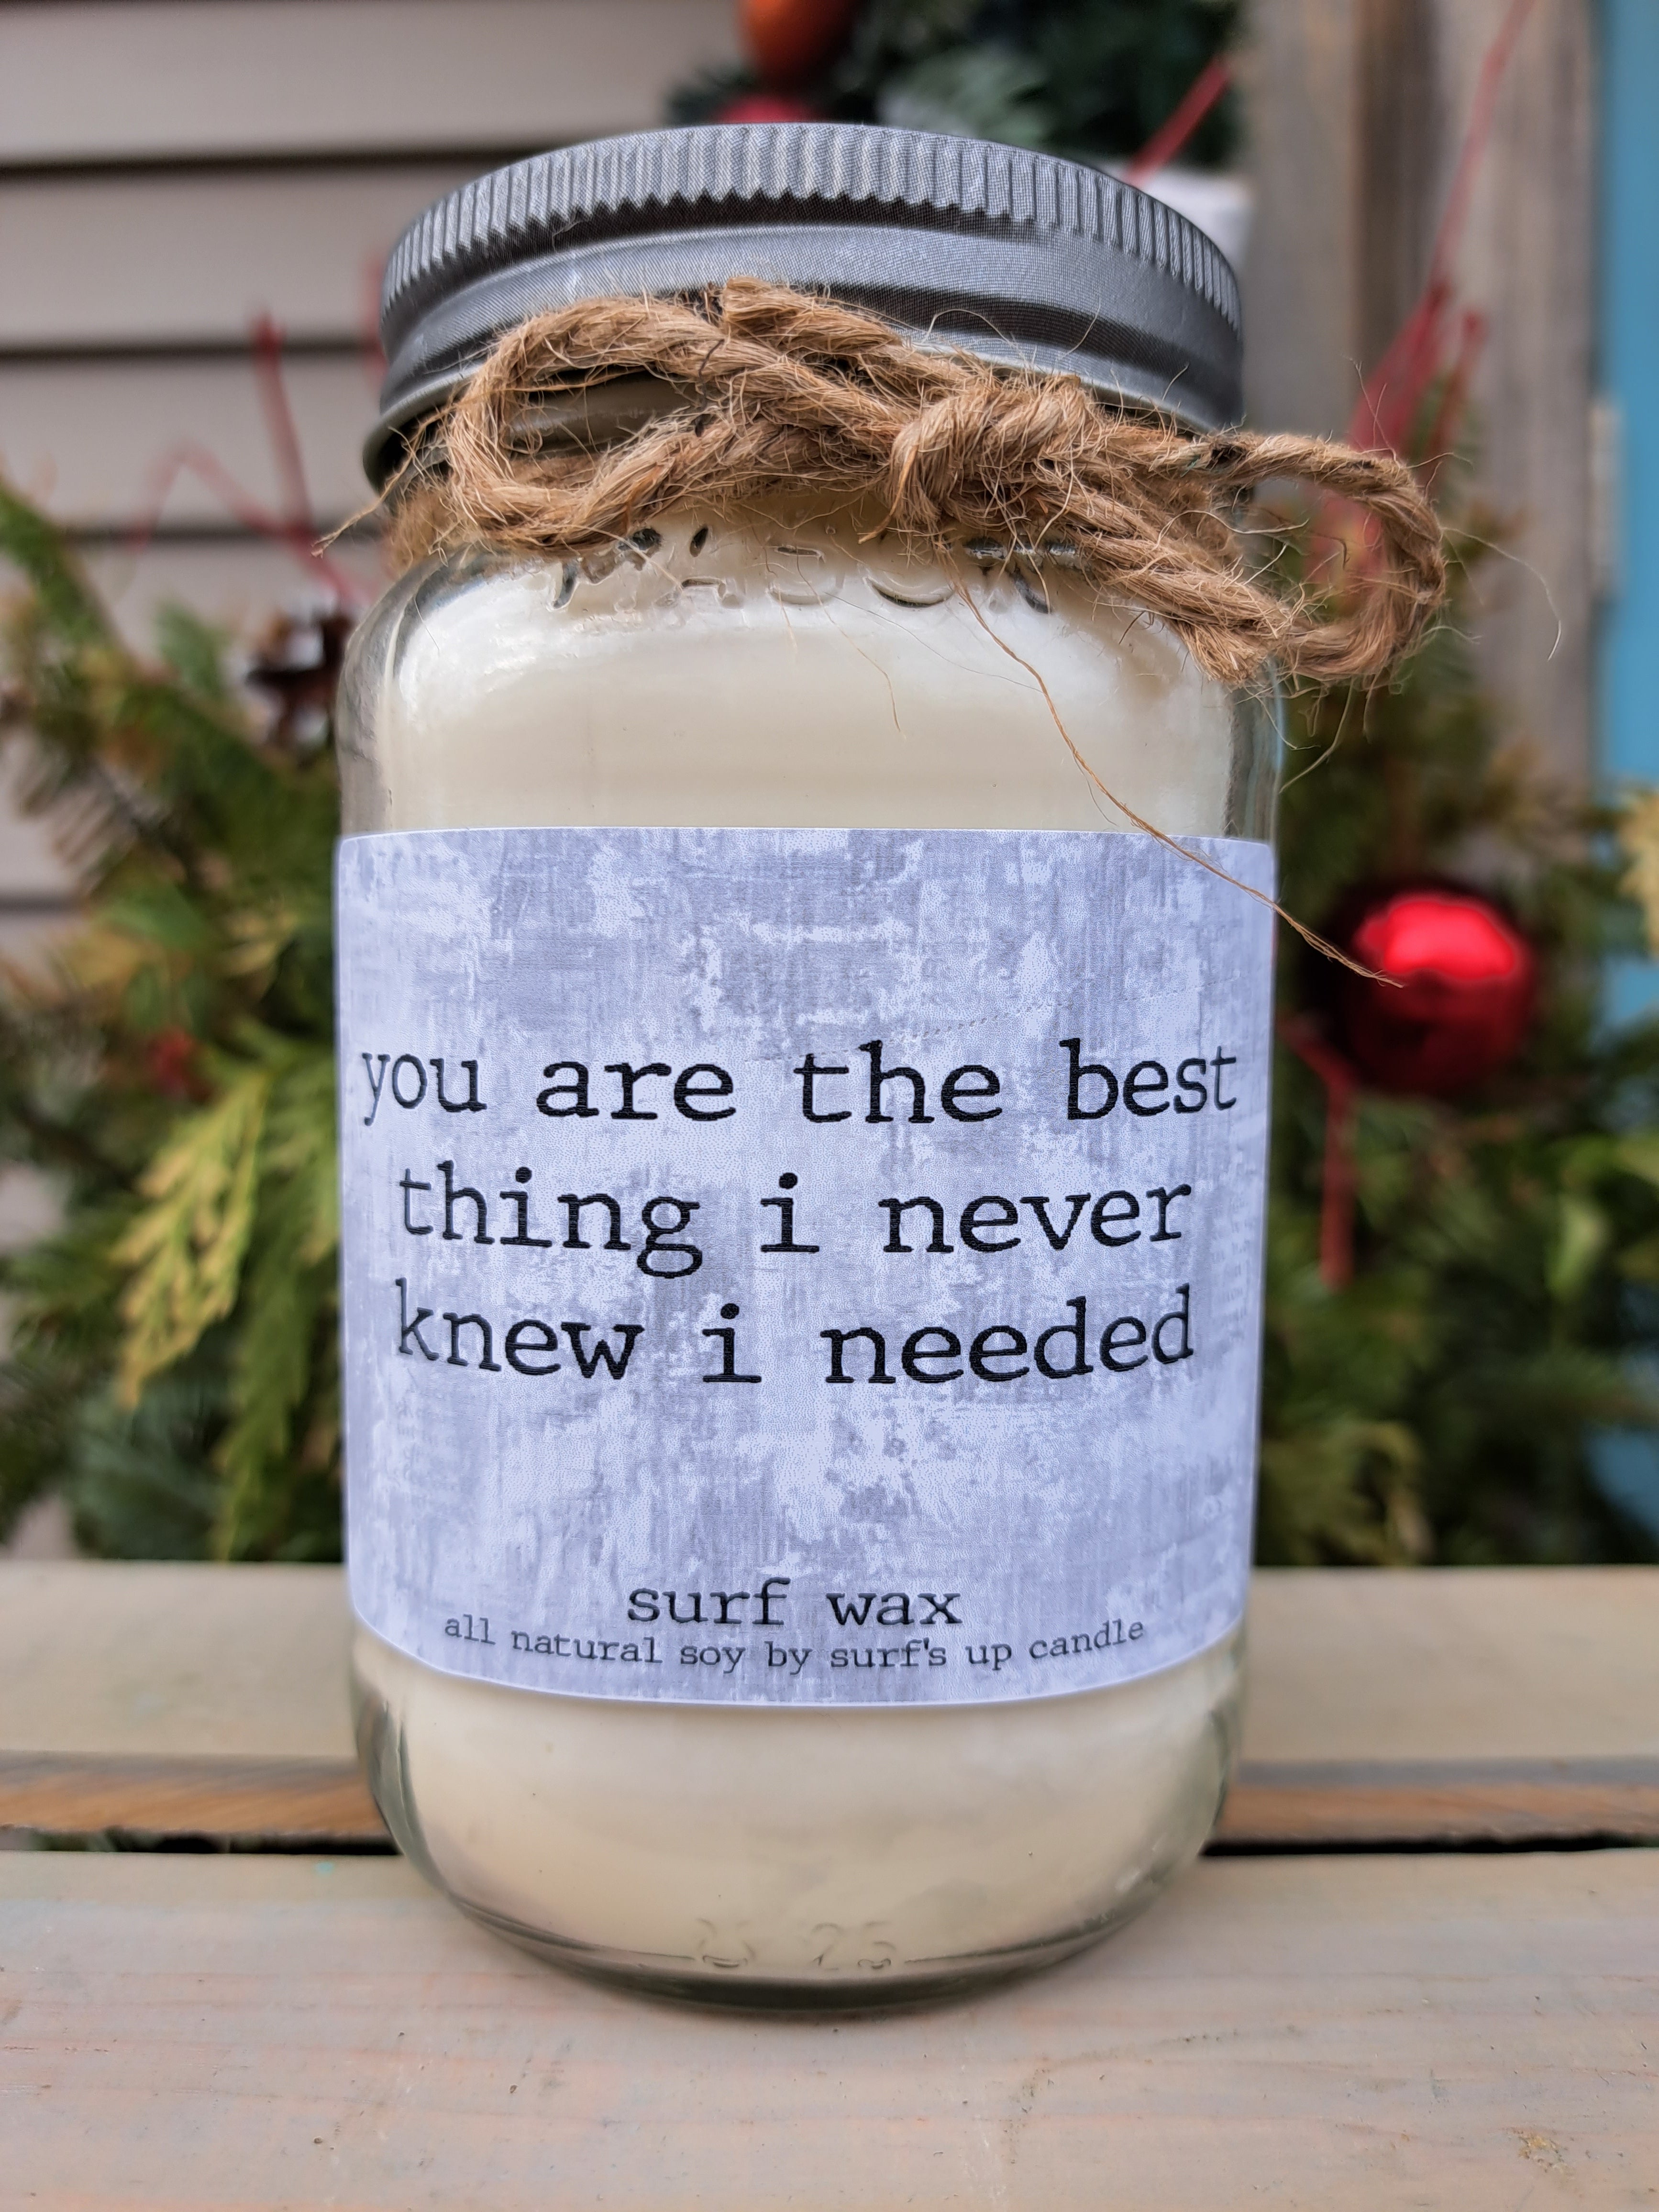 The Best Thing Surf Wax Mason Jar Candle - Romantic Quotes Collection